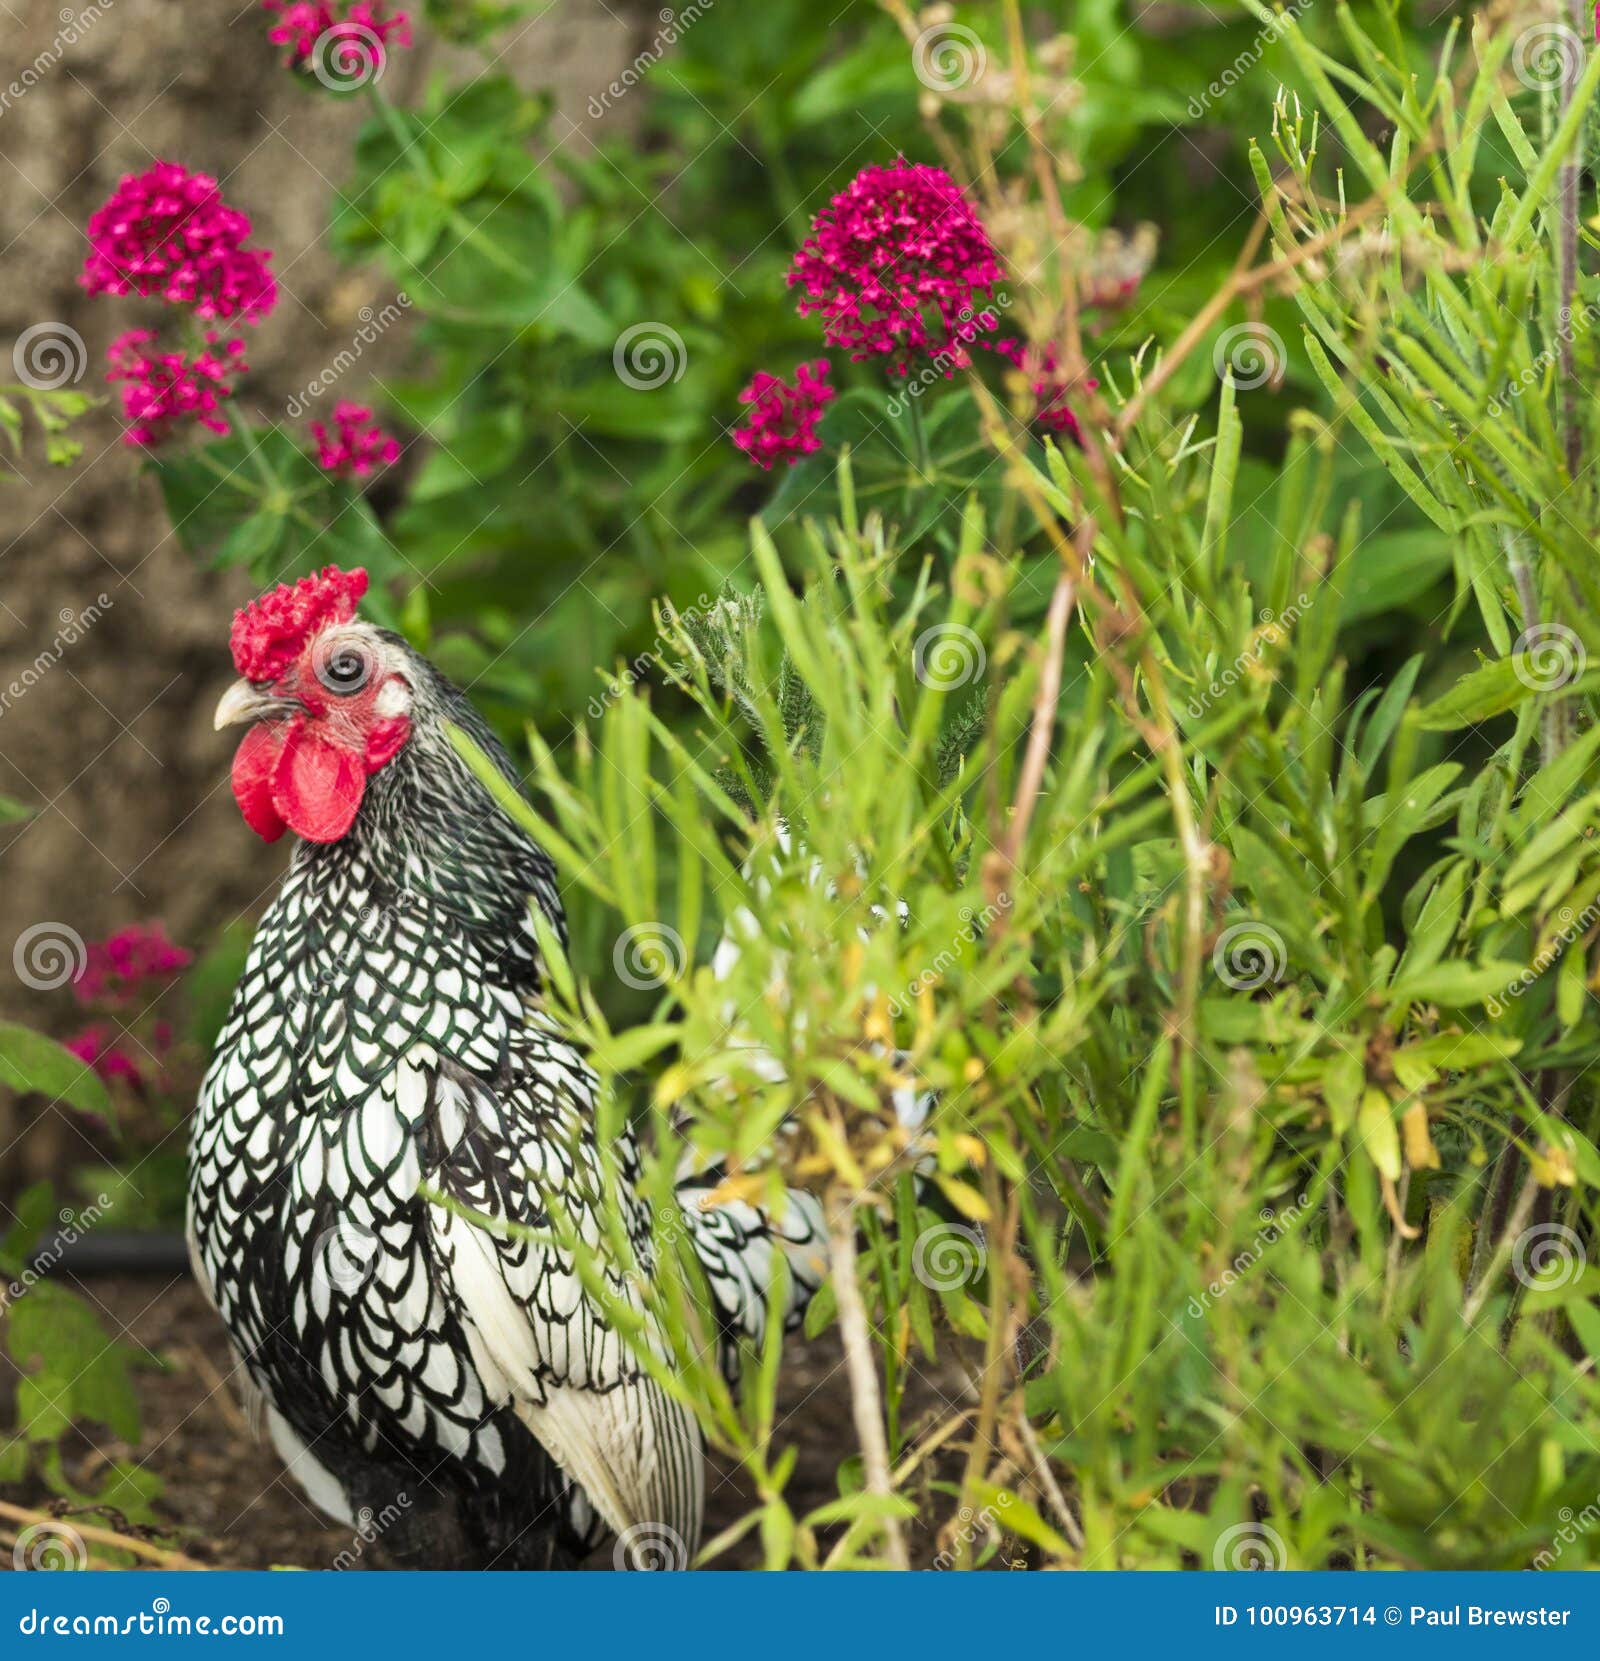 Sebright Chicken With Flowers In Garden Stock Photo Image Of